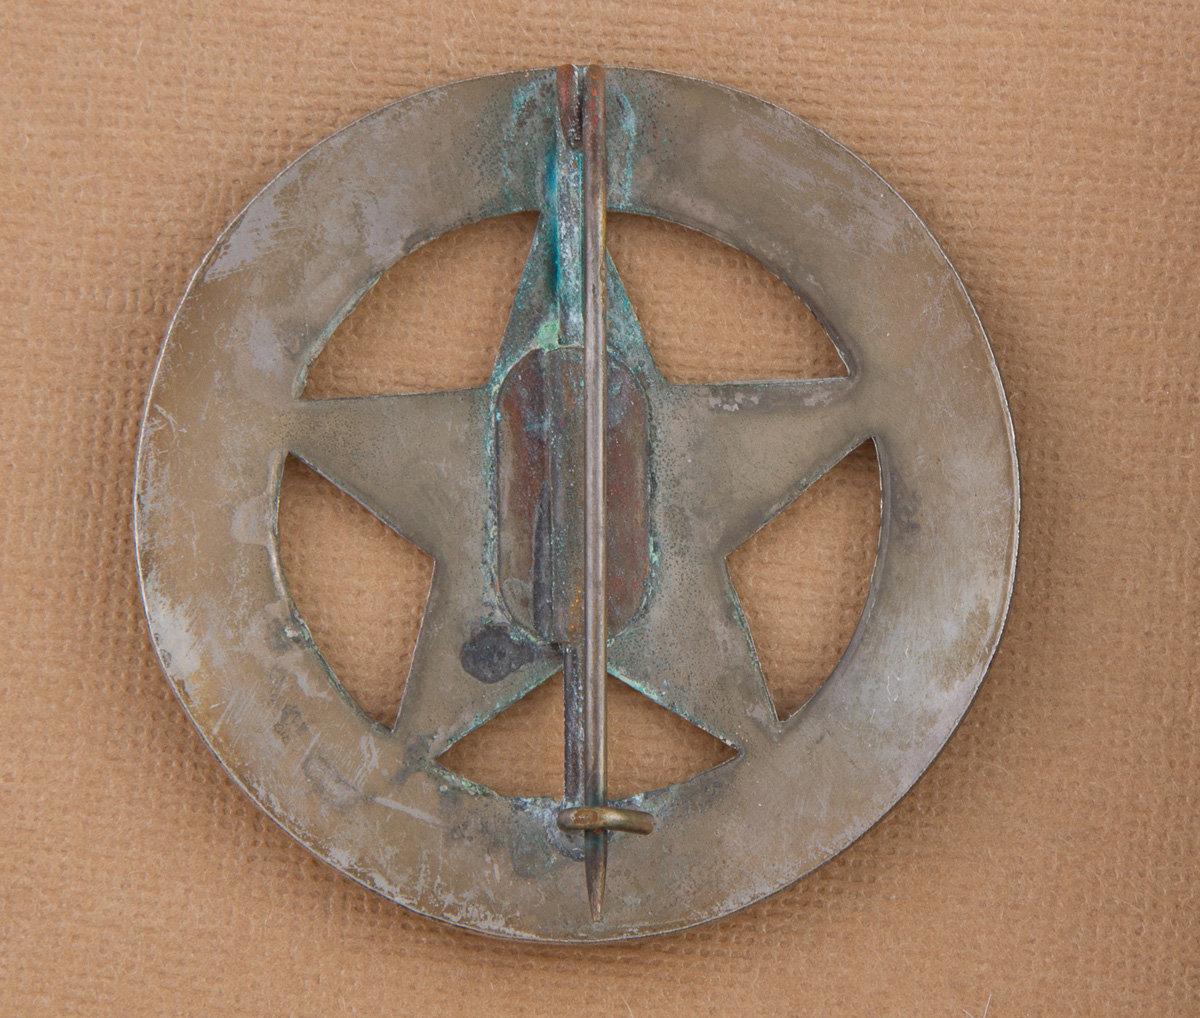 Circle star Badge, "SHERIFF, CONCHO COUNTY, TEXAS",  2 3/4" across, showing nice even wear.  George